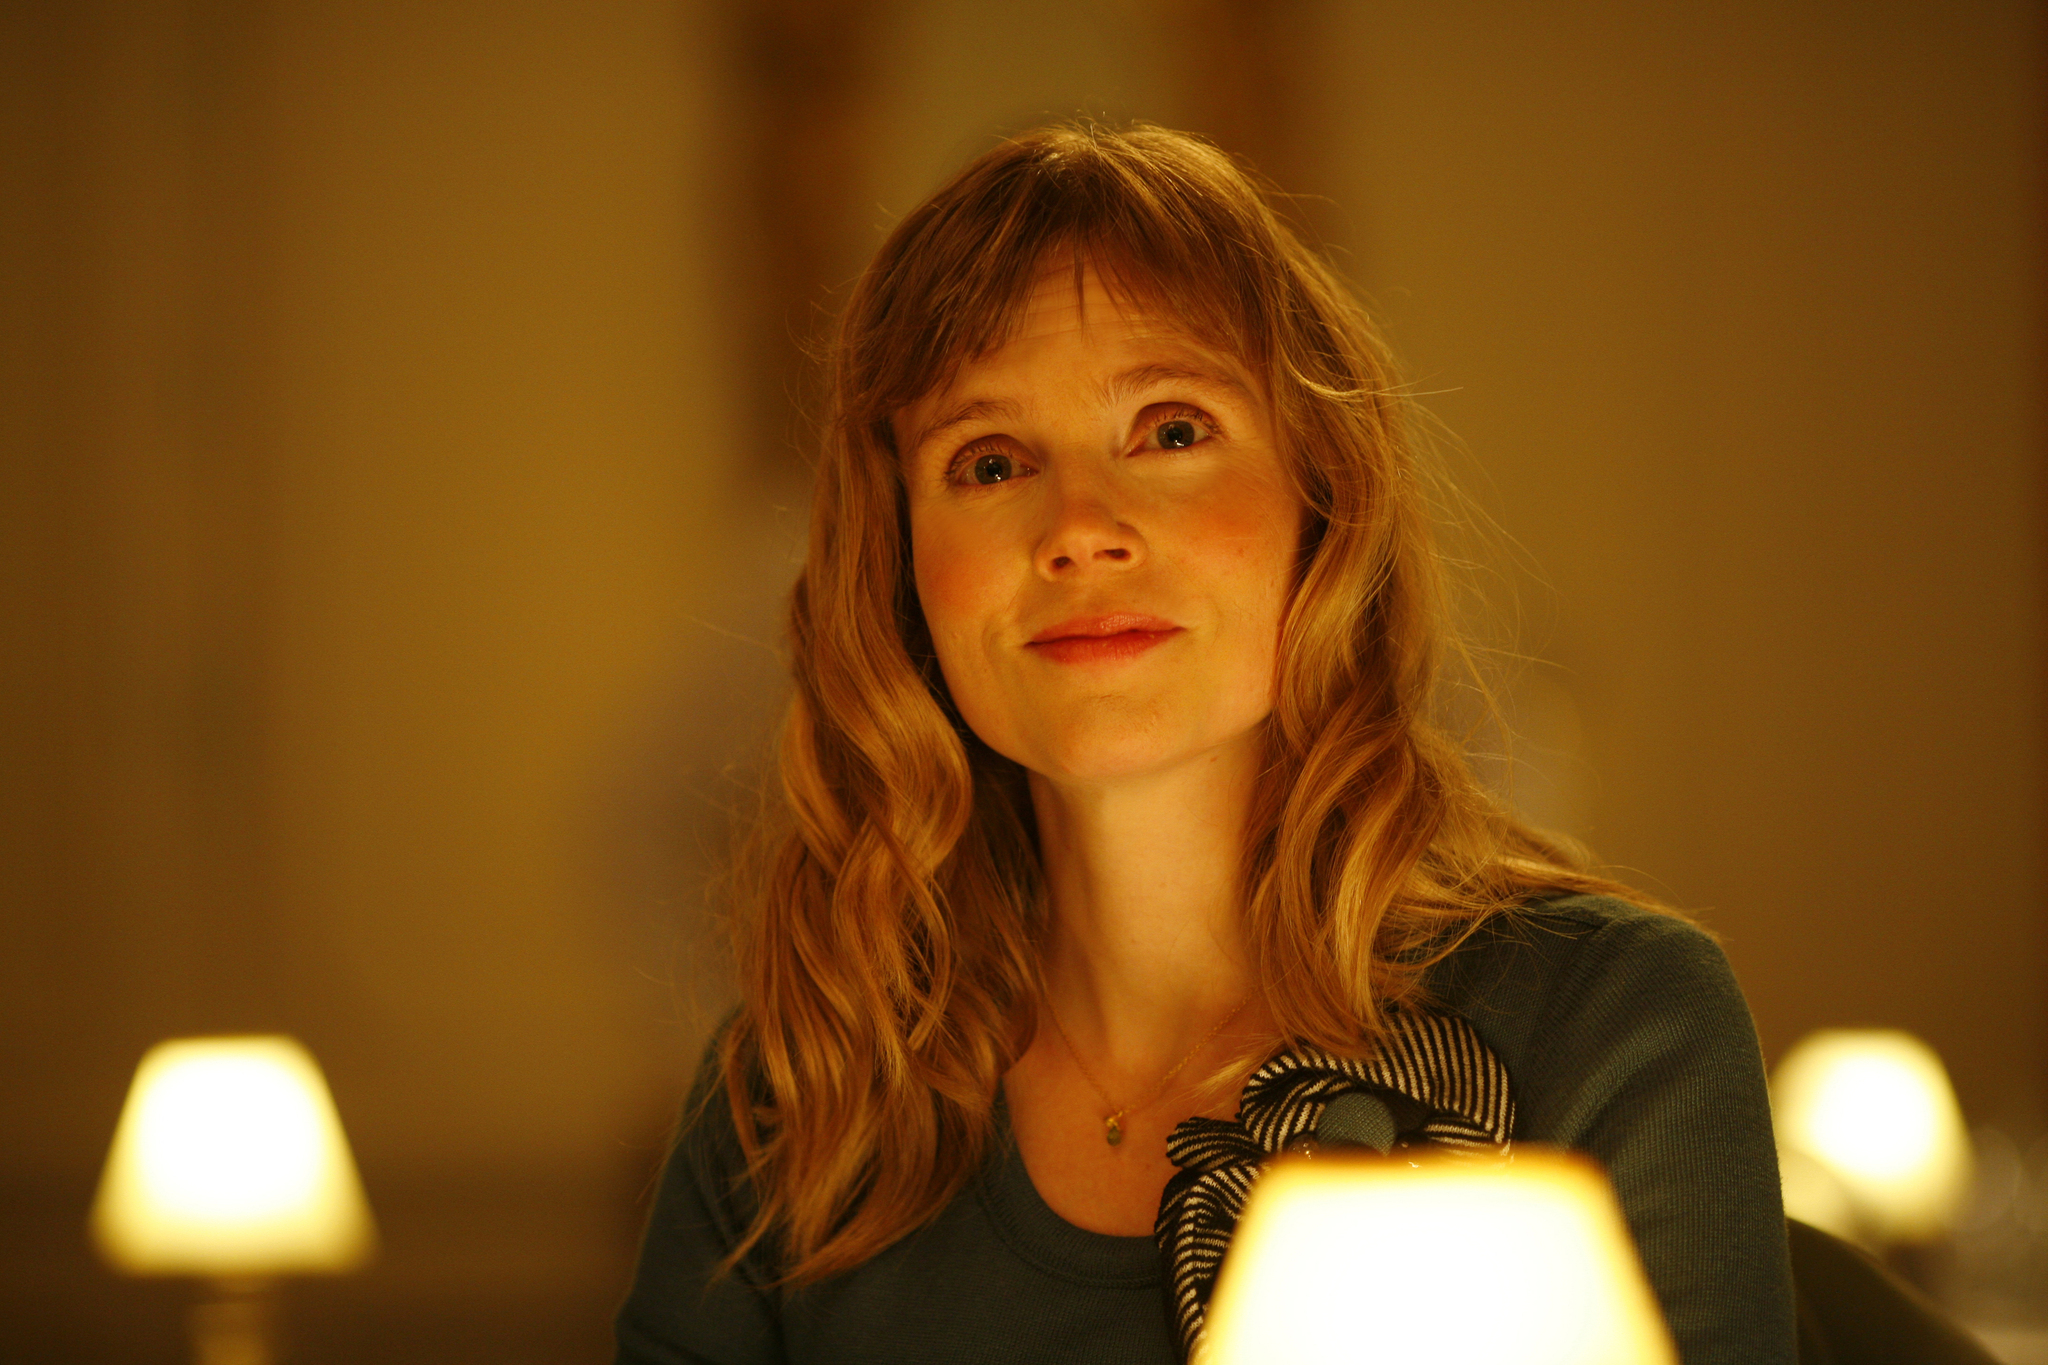 Still of Isabelle Carré in Les émotifs anonymes (2010)